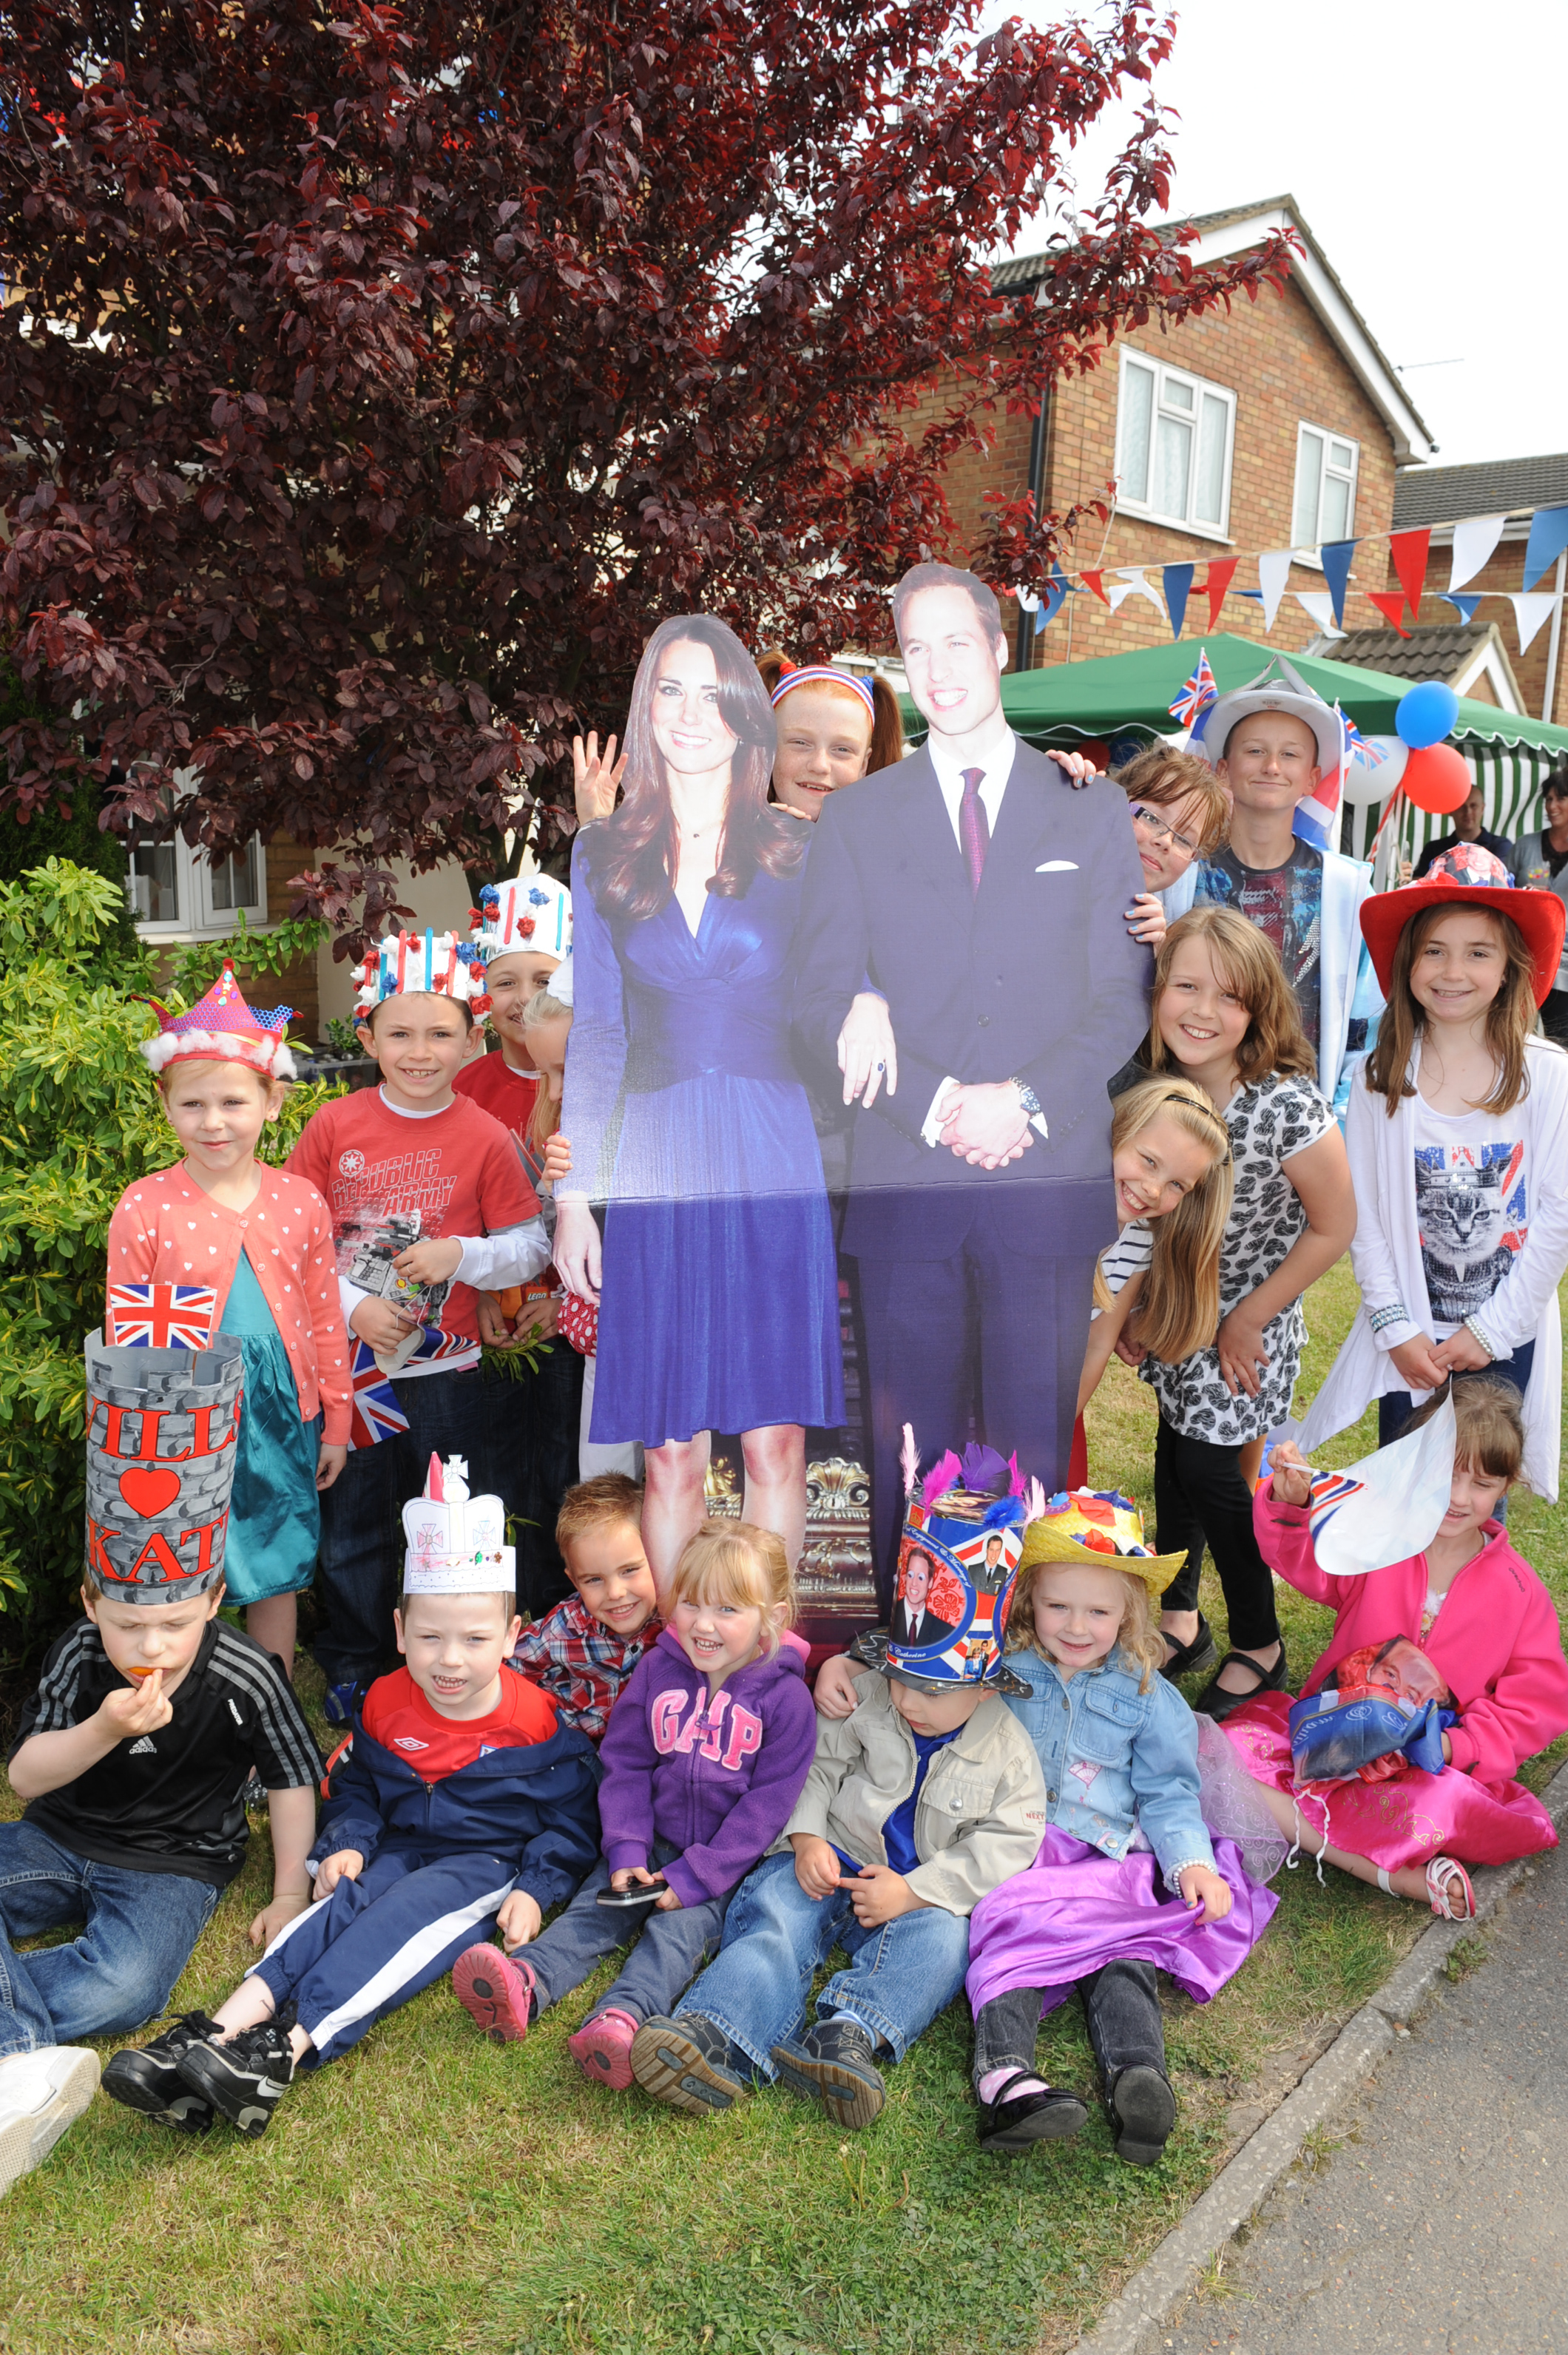 Cardboard cut-out - a Royal wedding street party at Van Diemens Pass, Canvey